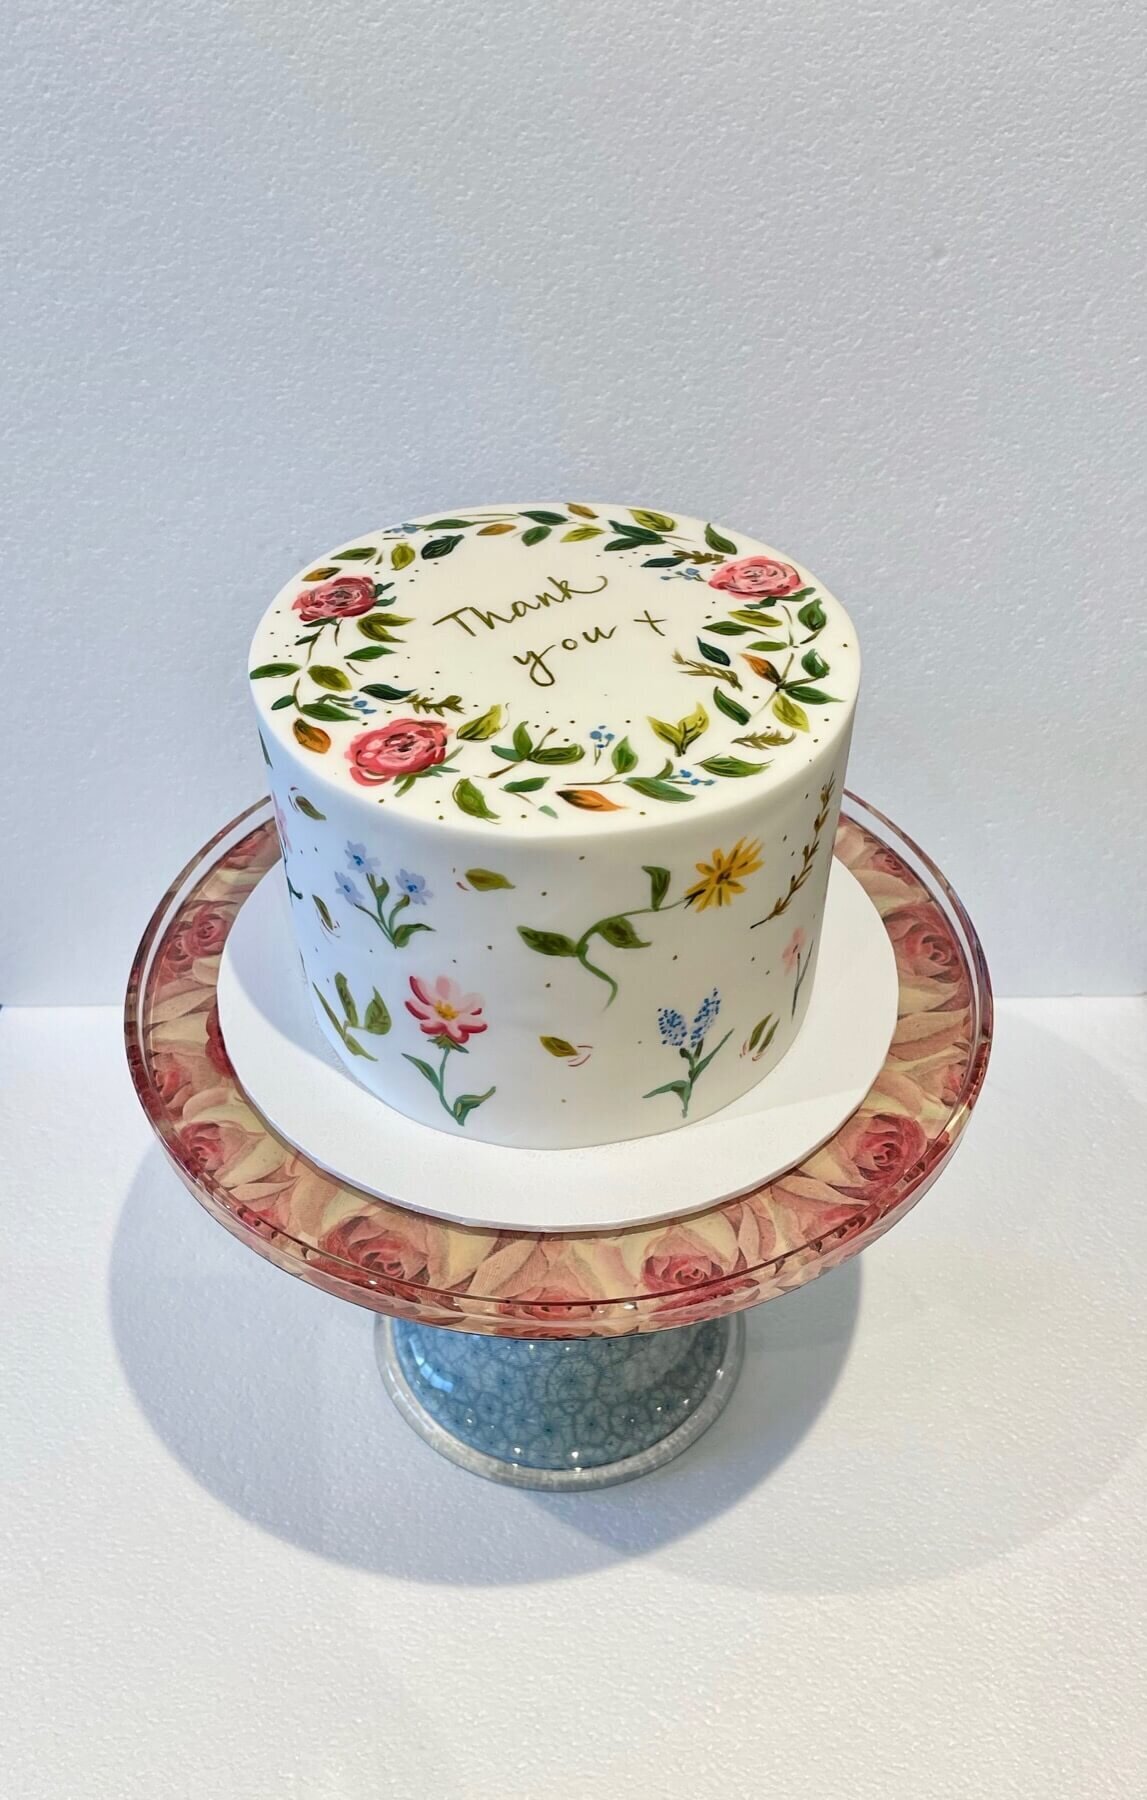 An elegant hand painted Thank You cake with hand painted flowers